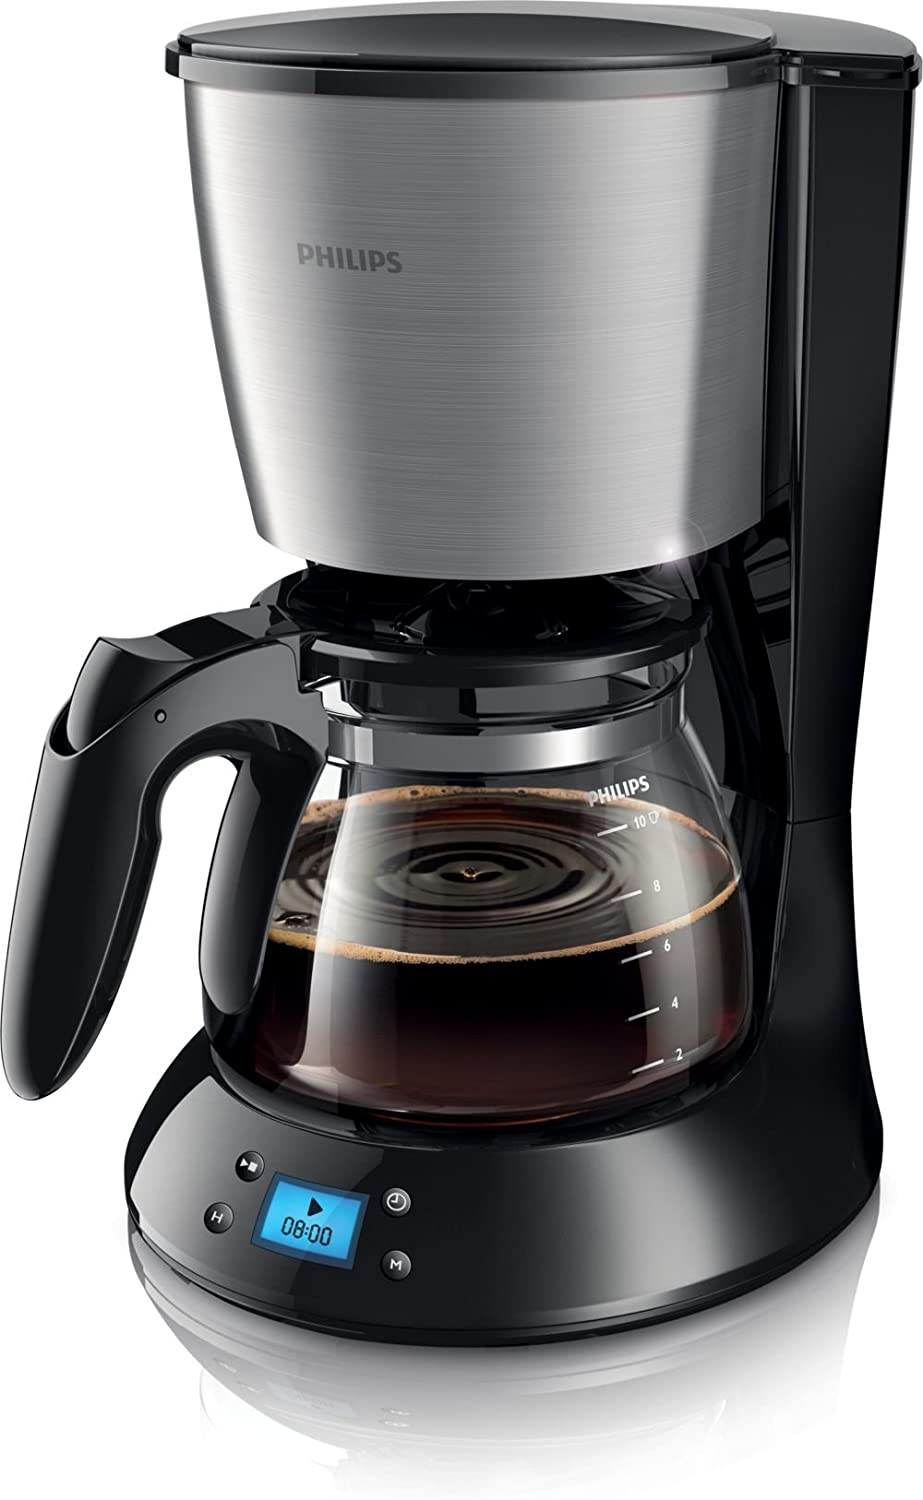 Philips HD New Daily 7459/20 Coffee Pot, Black